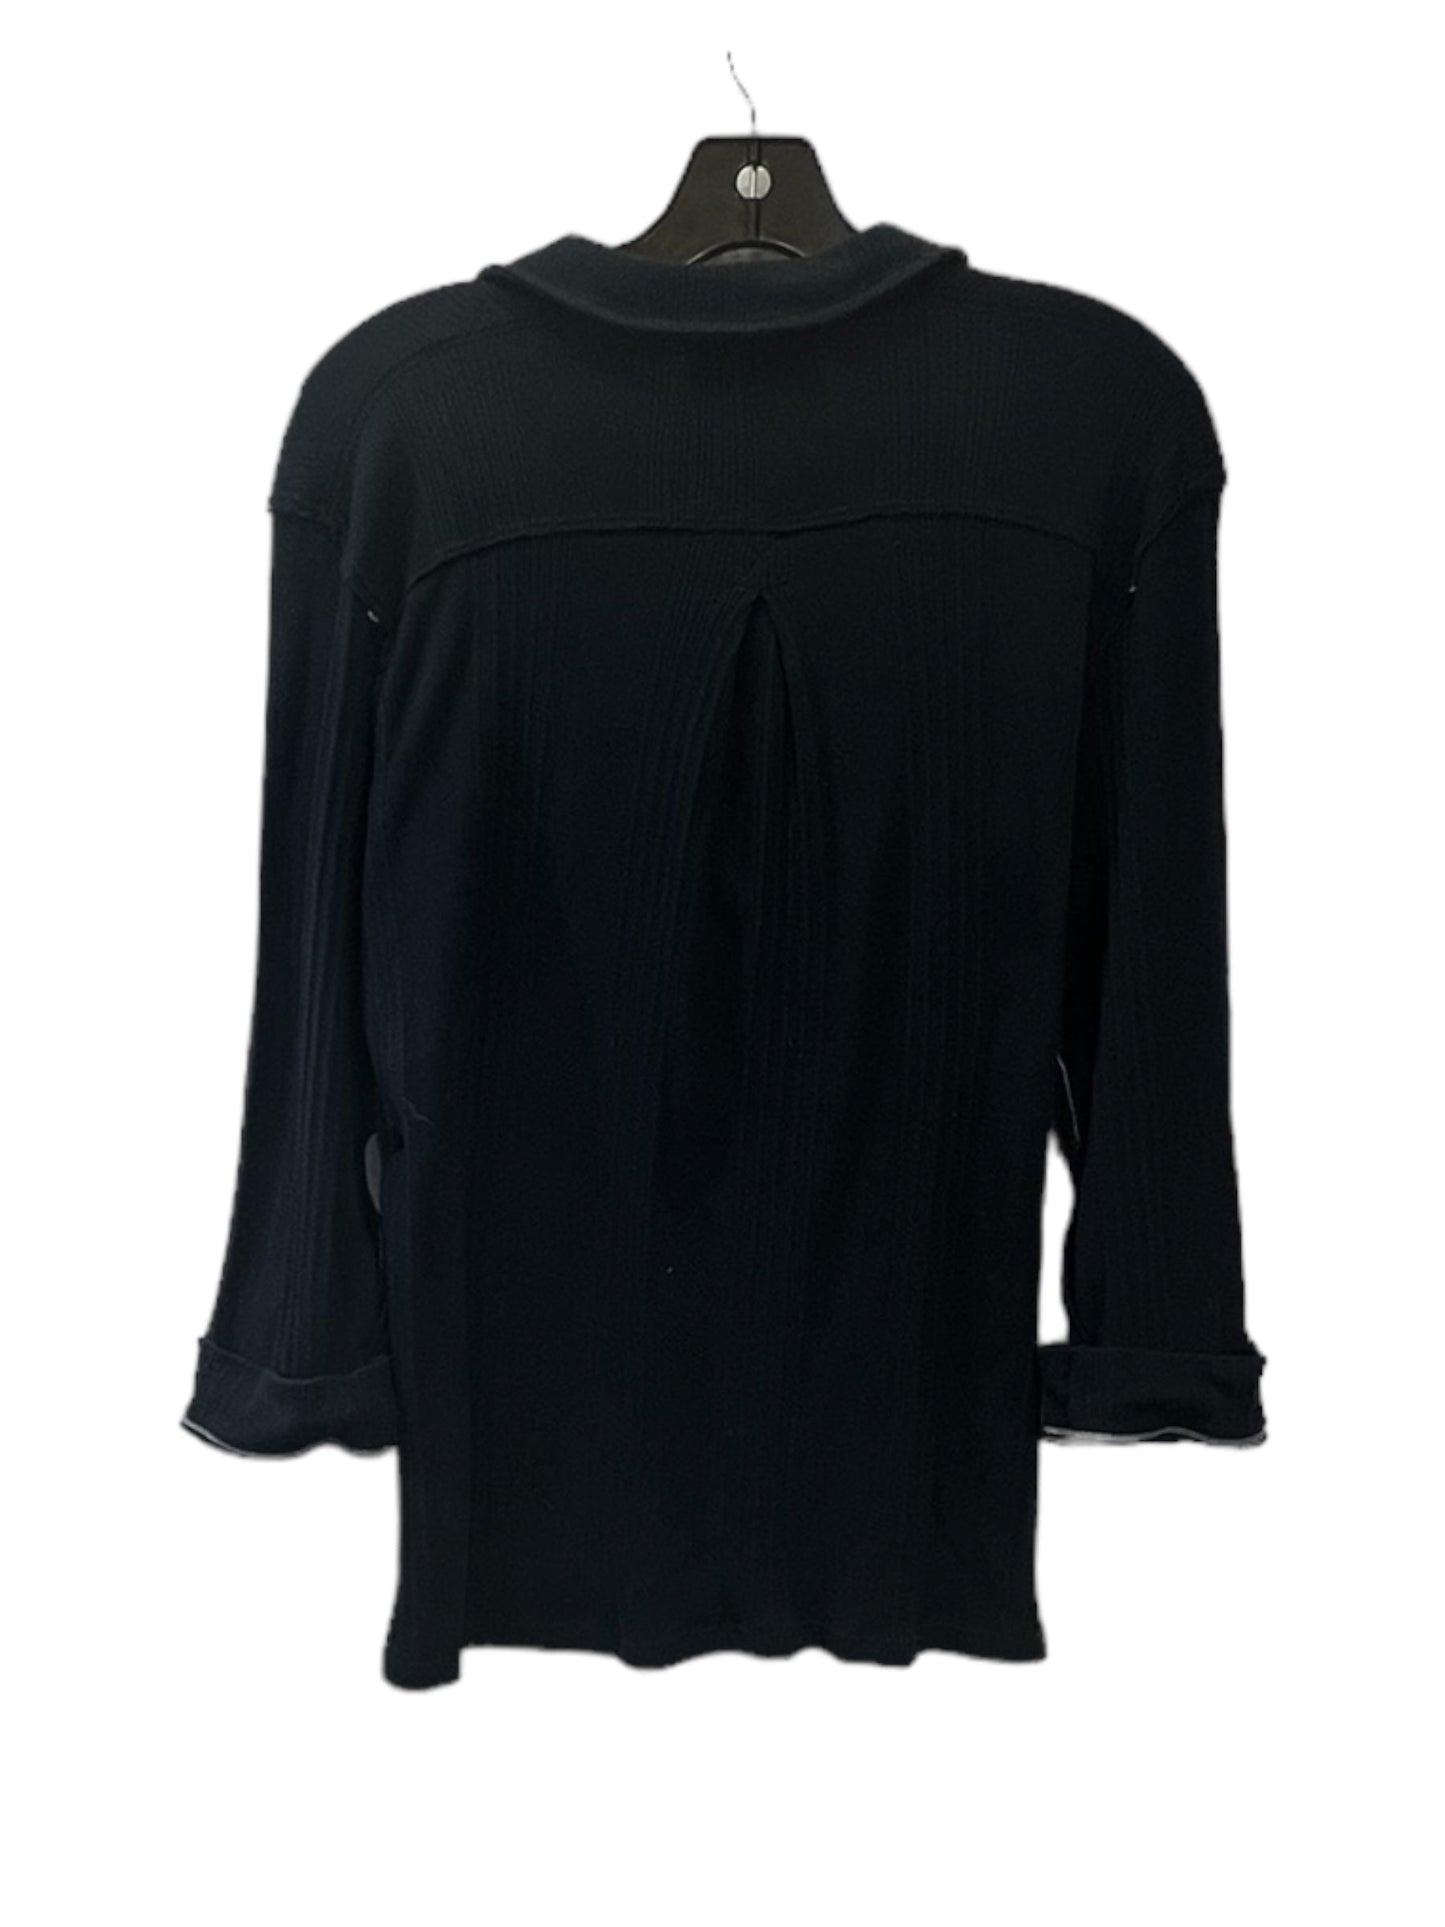 Navy Top Long Sleeve We The Free, Size Xxs